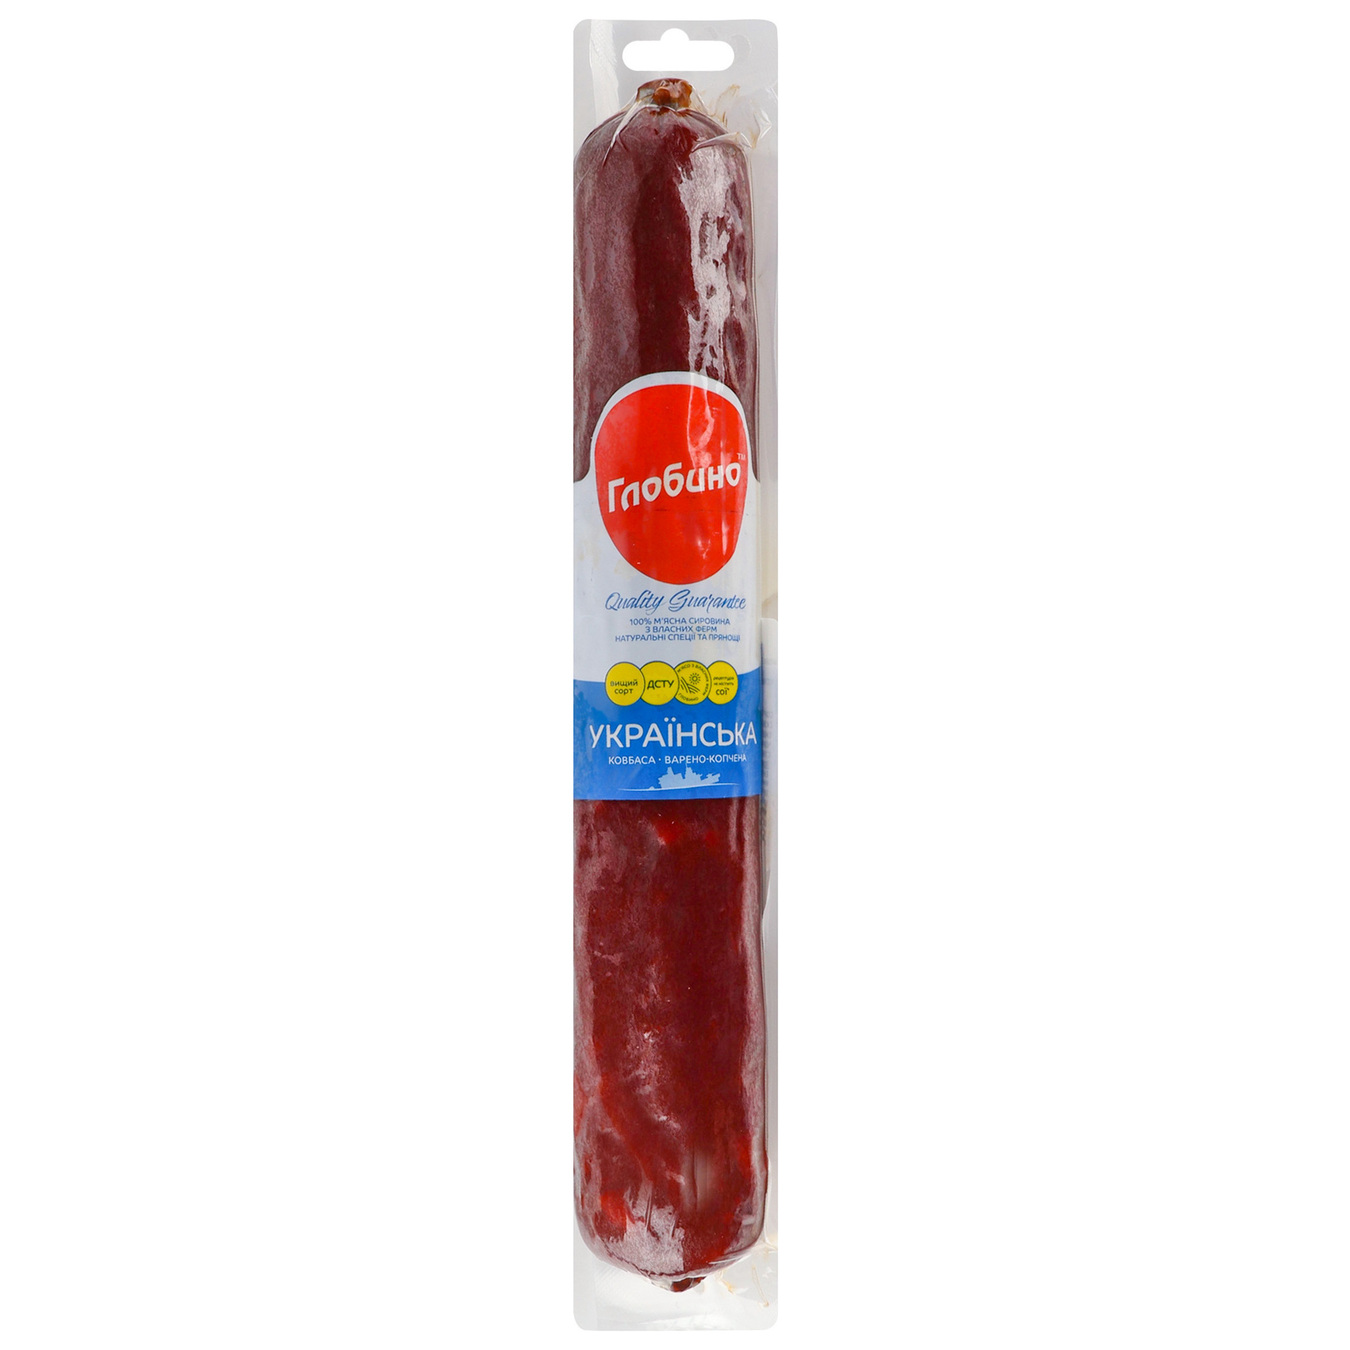 Globino Ukrainian sausage cooked and smoked of the highest quality 460g